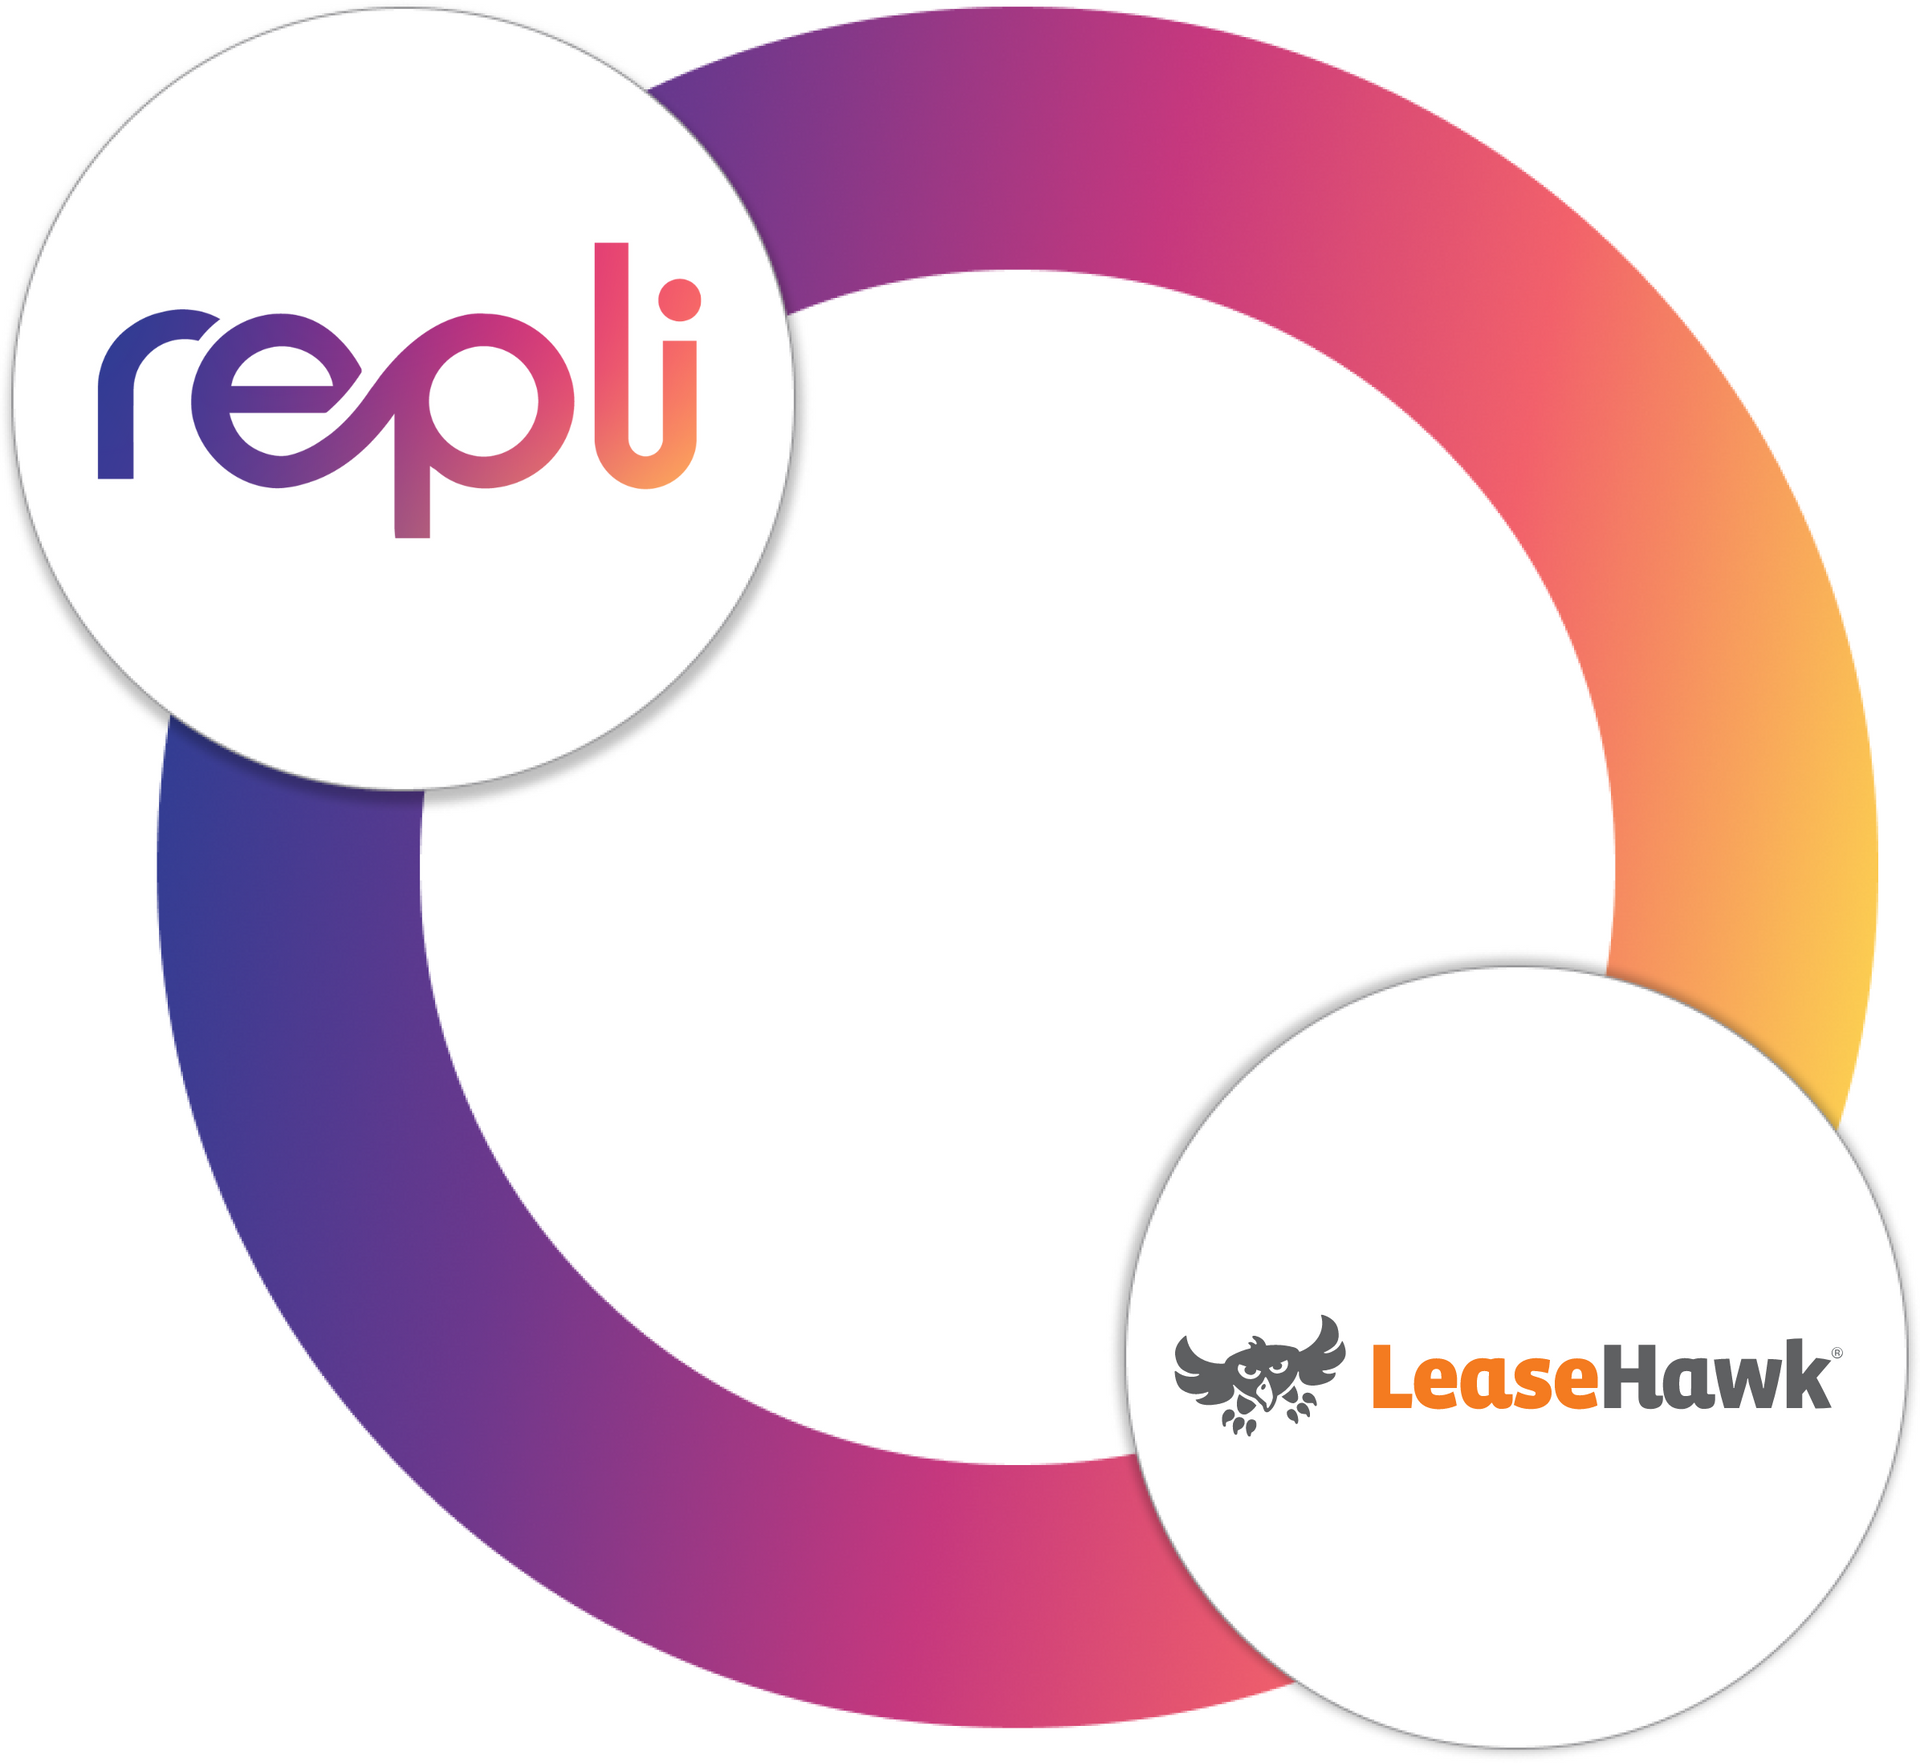 A logo for repli and leasehawk is shown